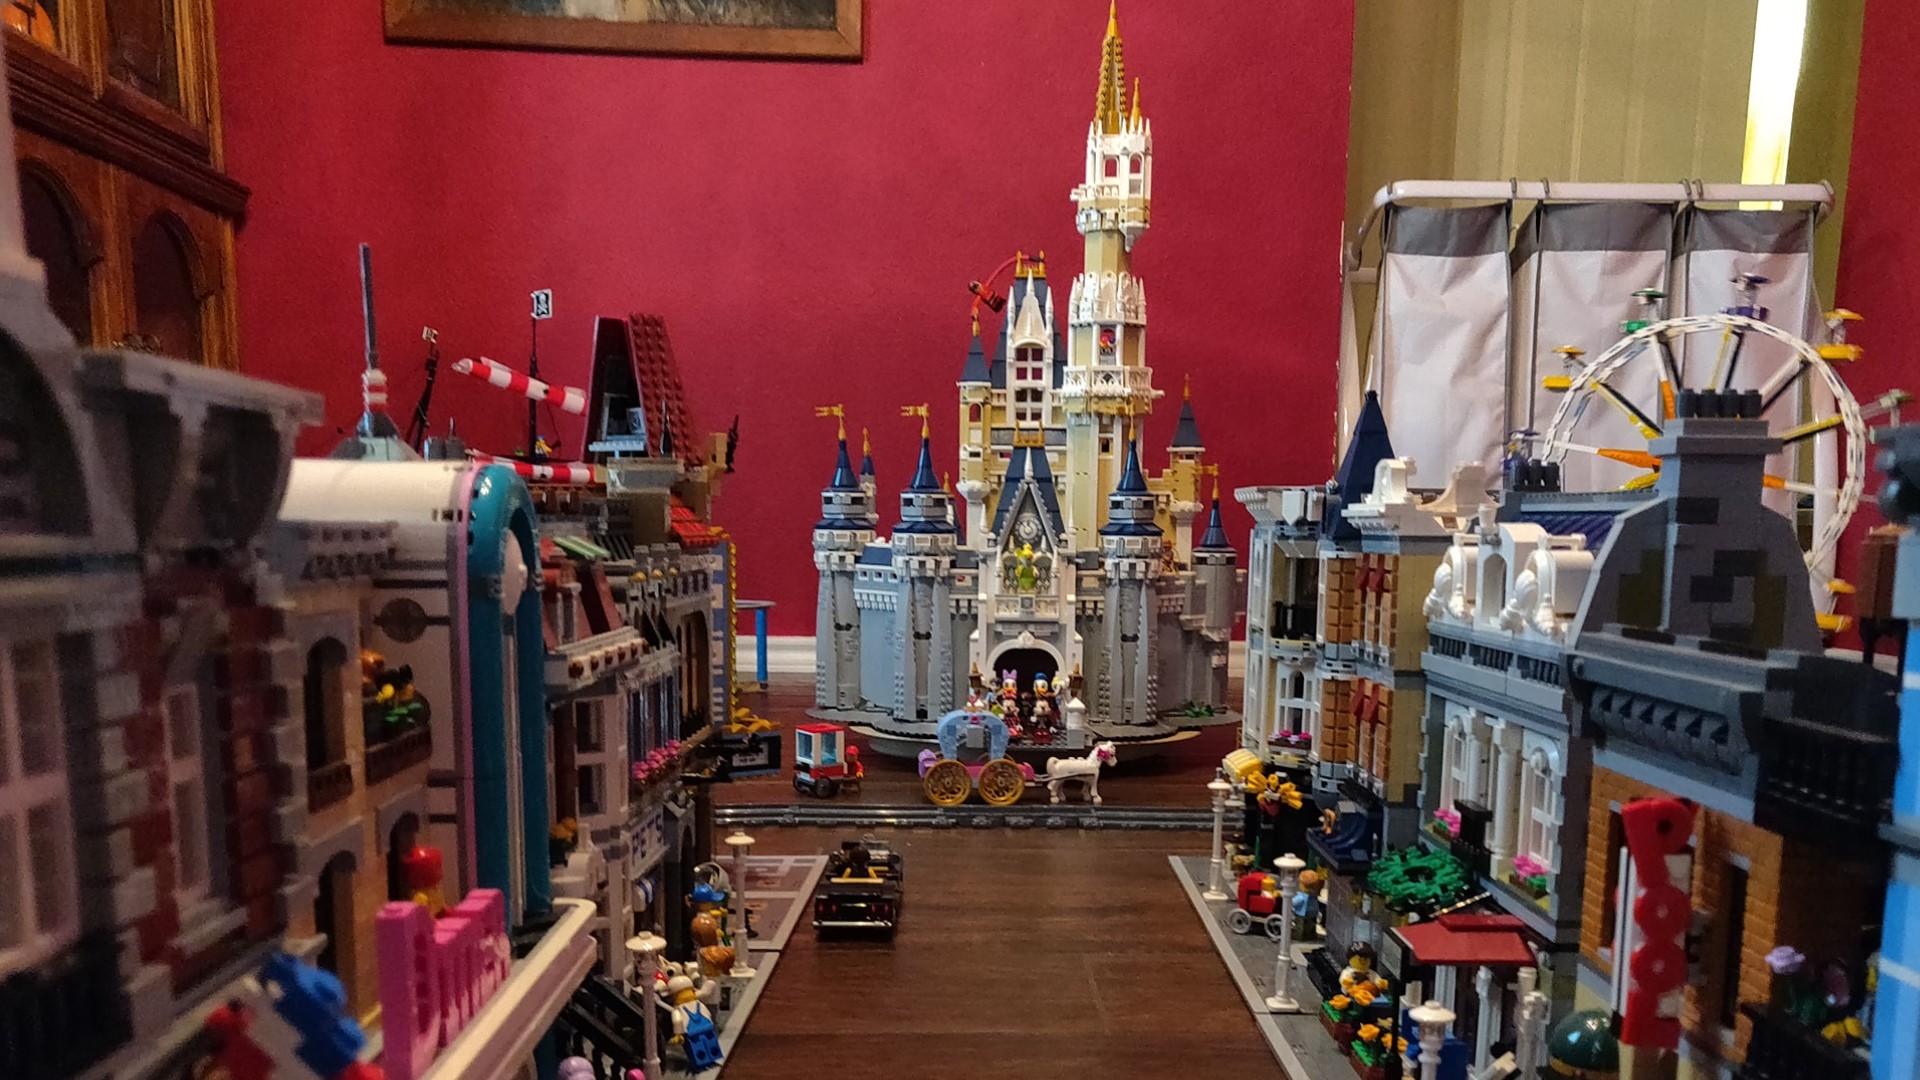 John Wayne Daugherty turned his dining room inside his home in The Colony into a makeshift Disneyland, using the many Lego sets he's built through the years.